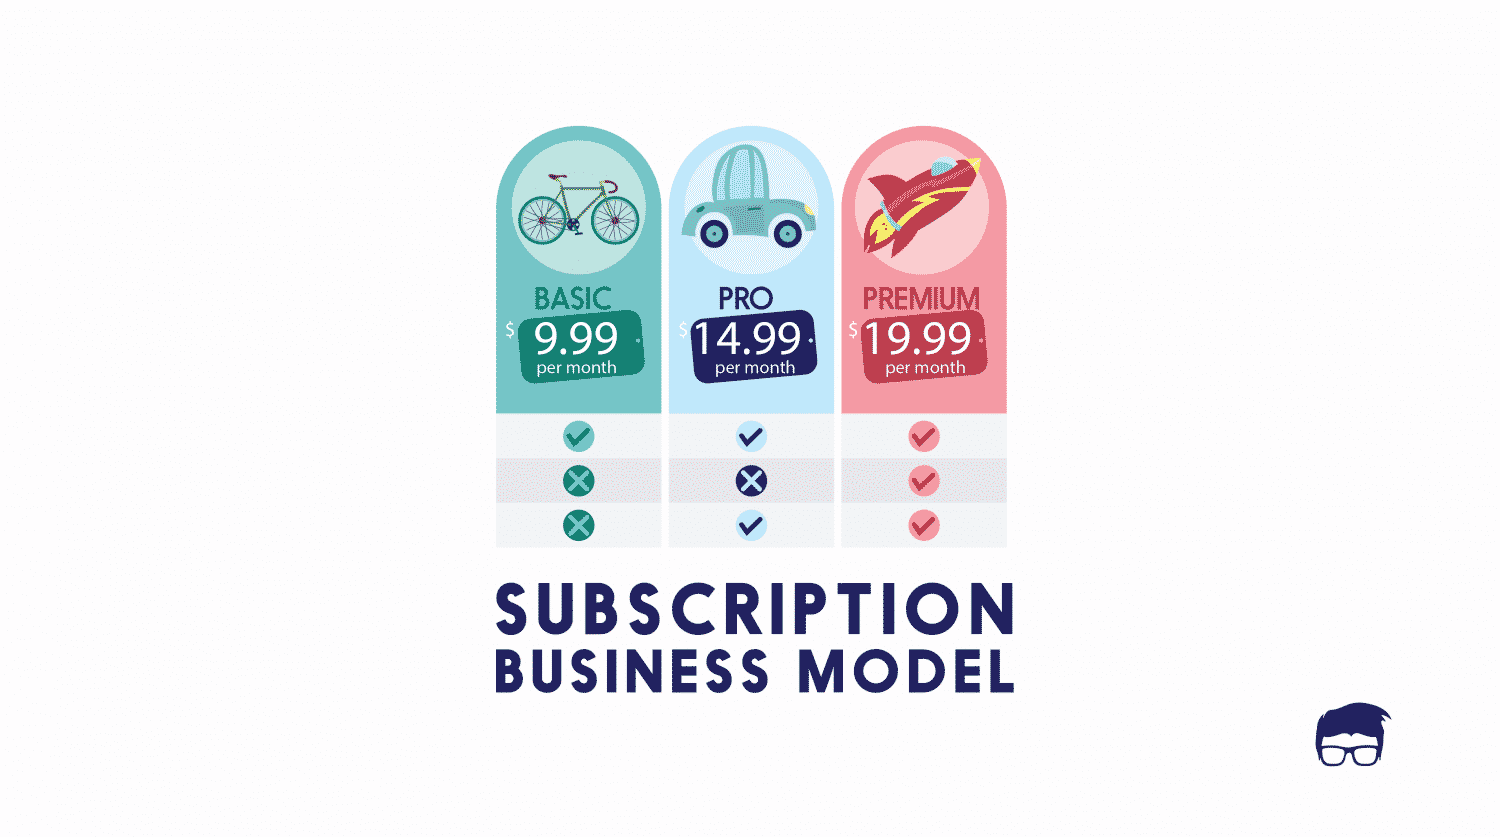 The Subscription Business Model